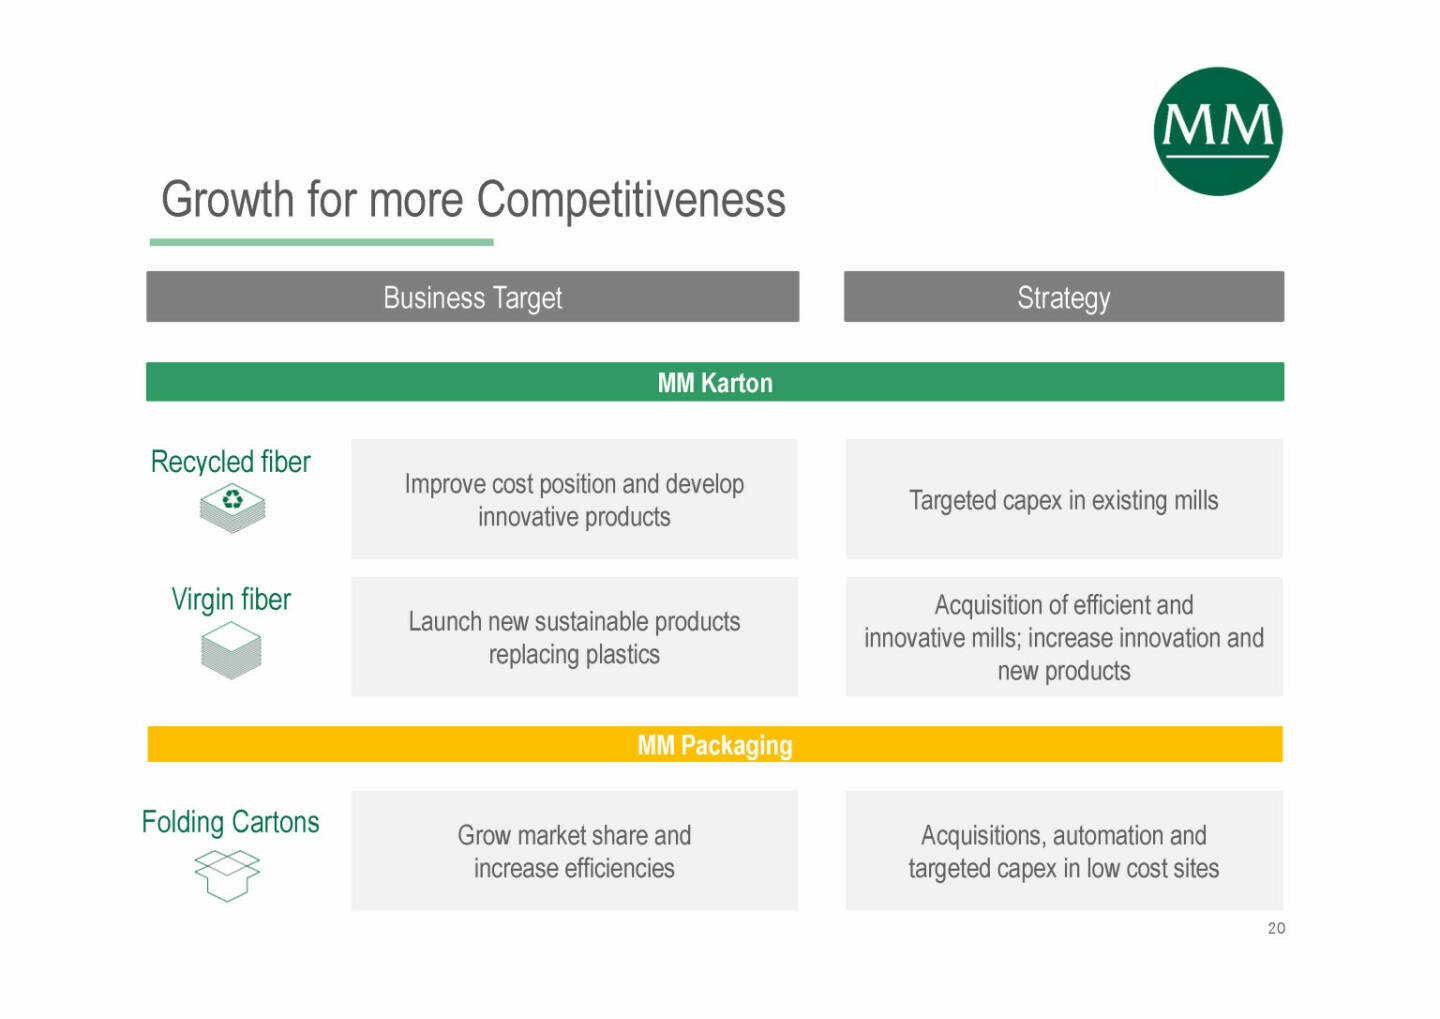 Mayr-Melnhof - Growth for more Competitiveness